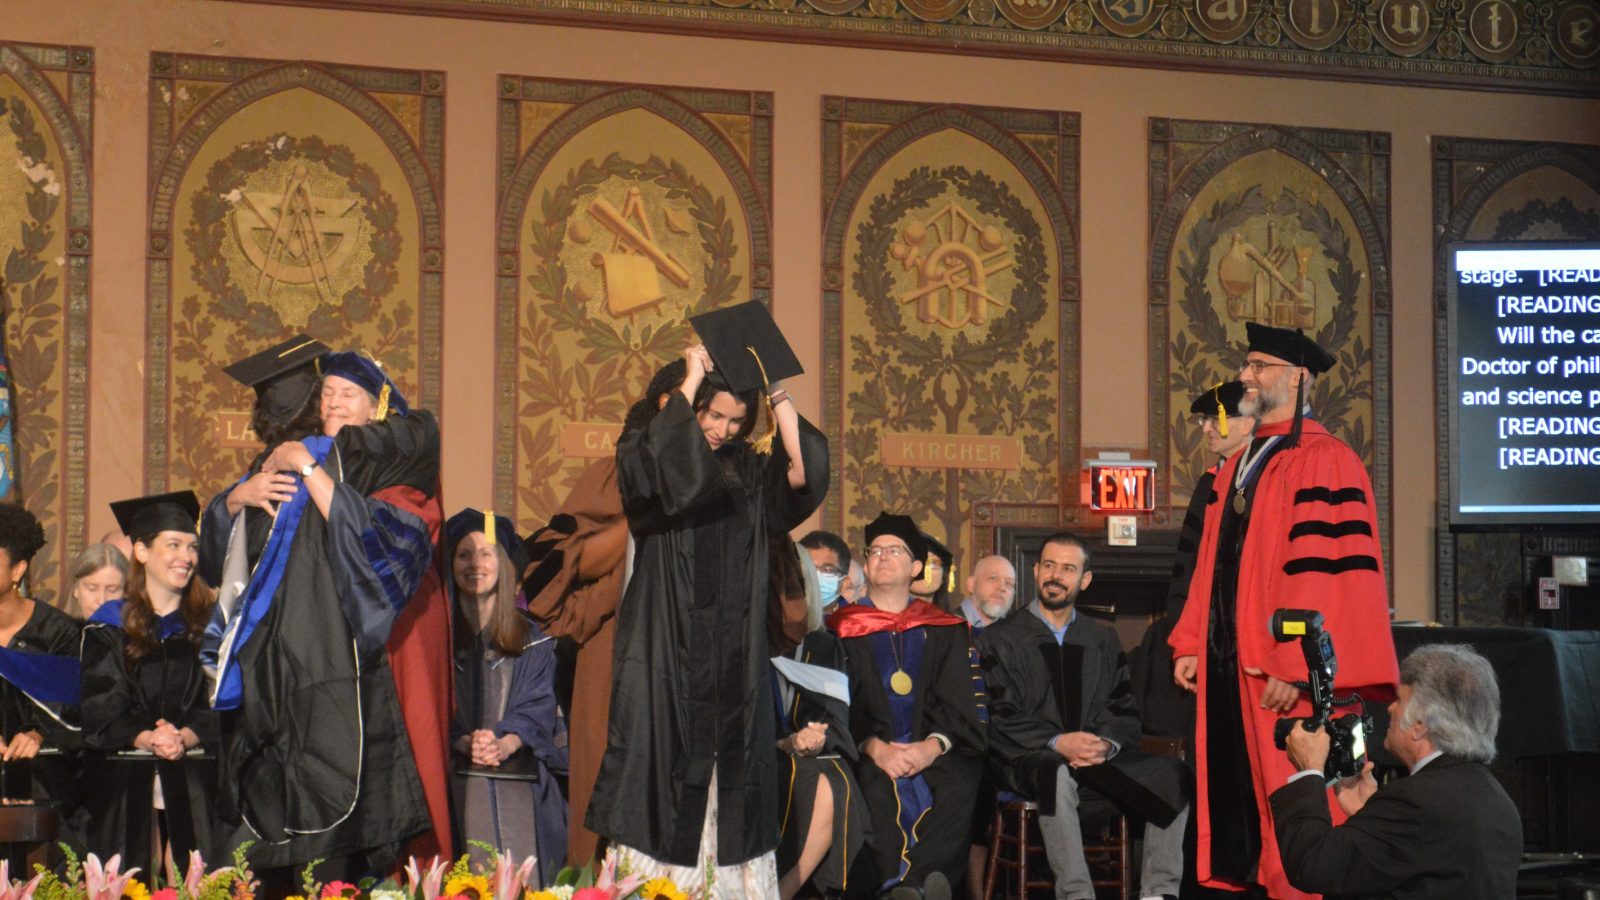 Graduate students on stage getting their doctoral hood placed on their shoulders by faculty